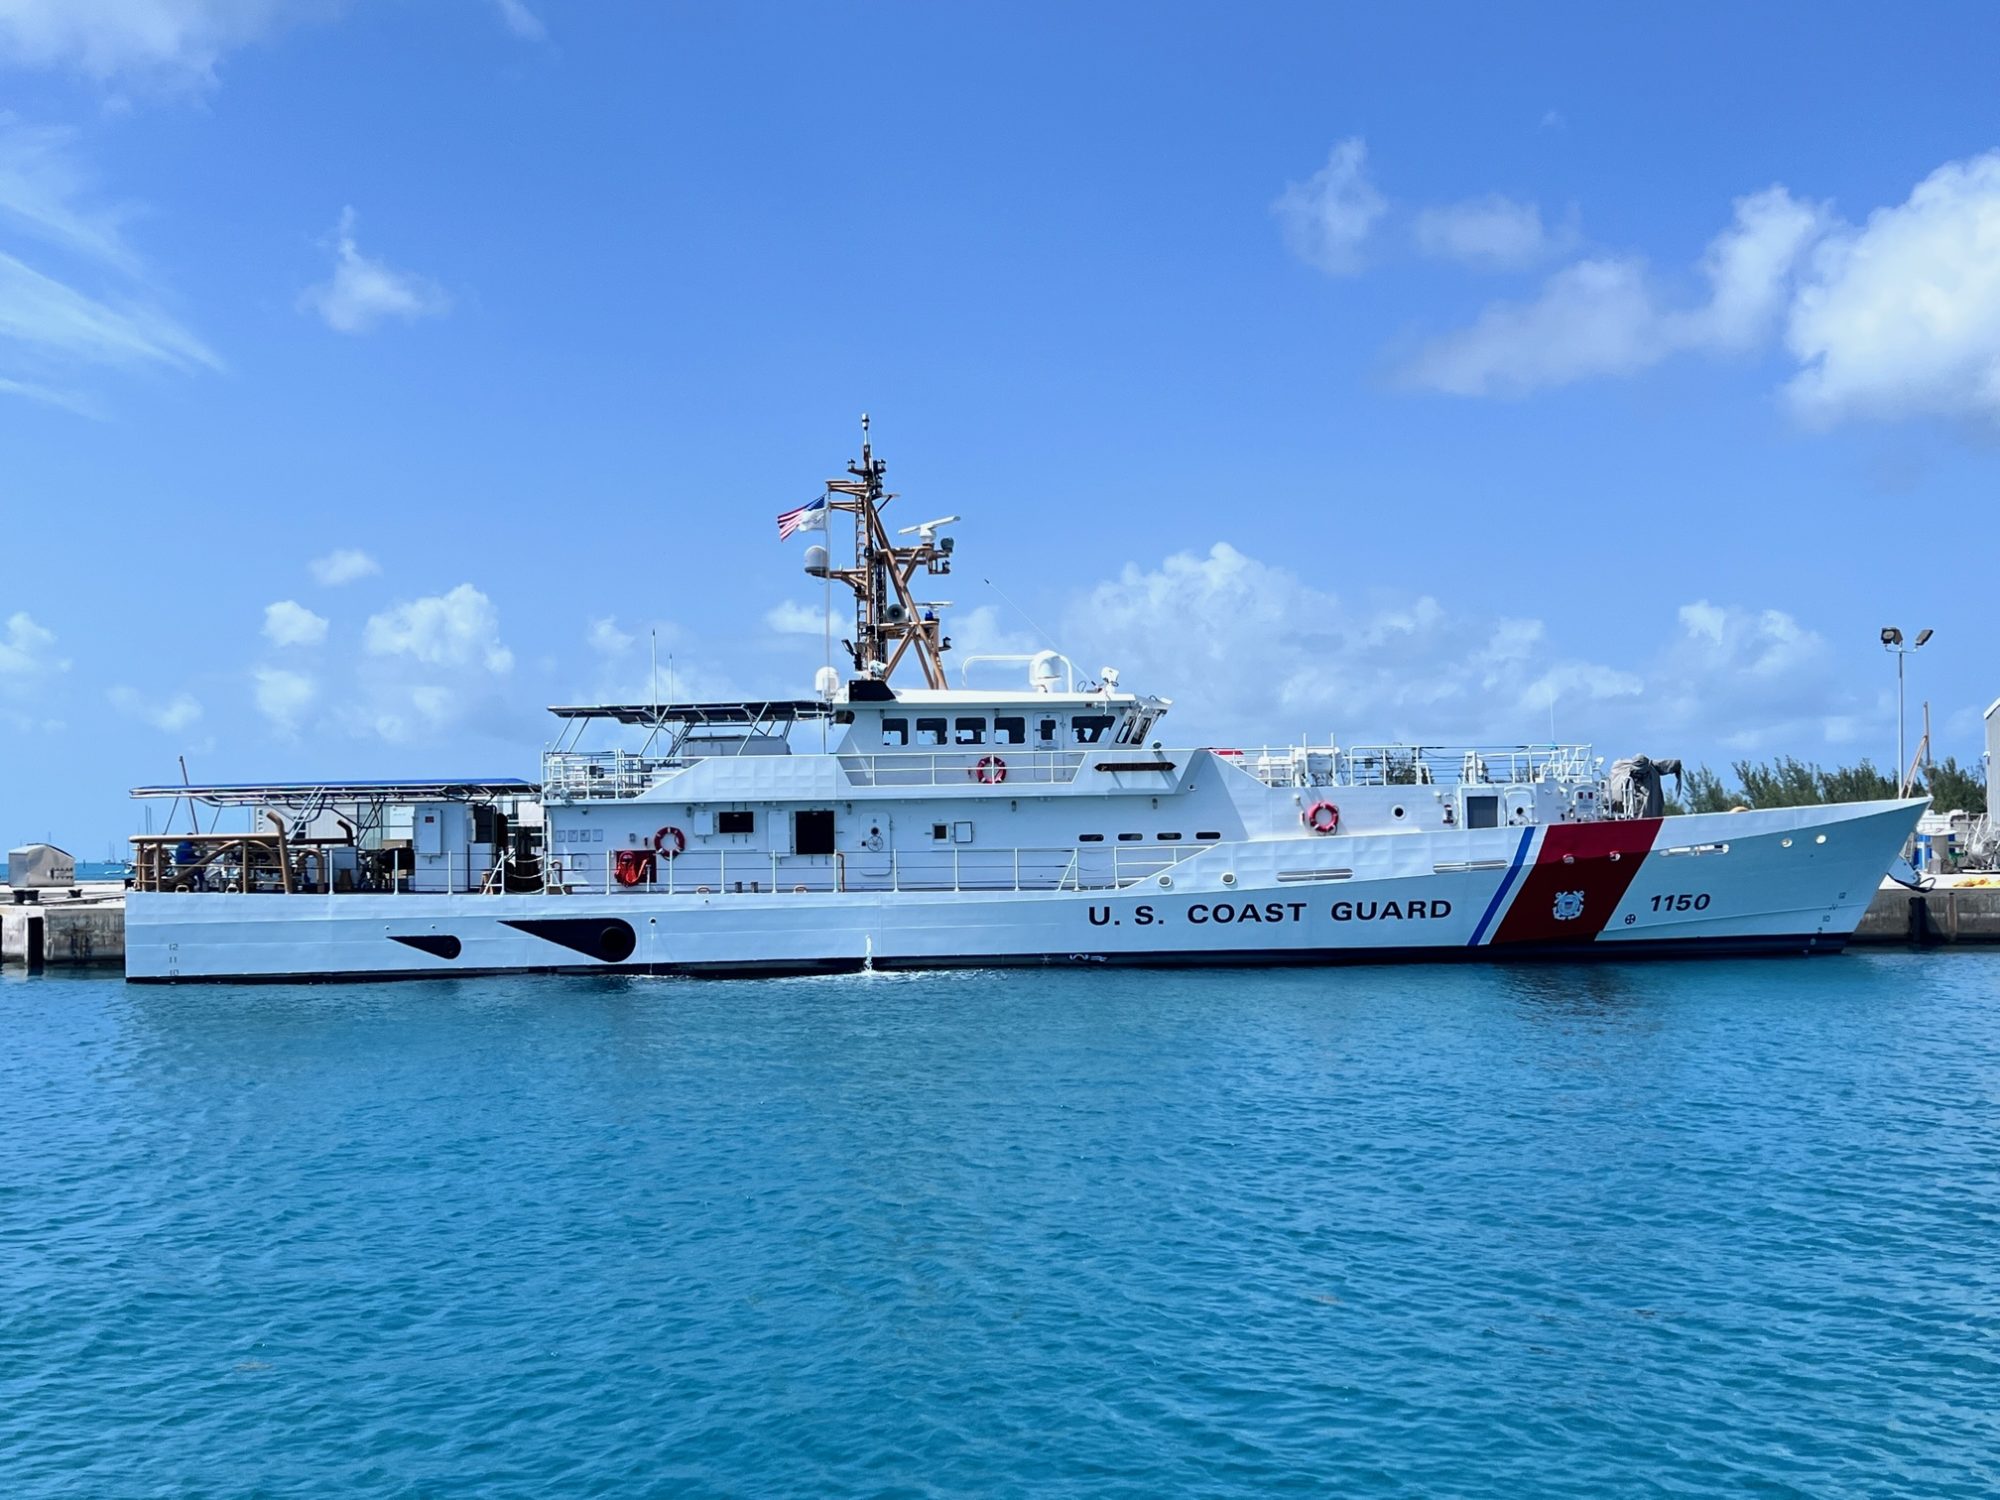 BOLLINGER SHIPYARDS DELIVERS 50TH FAST RESPONSE CUTTER TO U.S. COAST